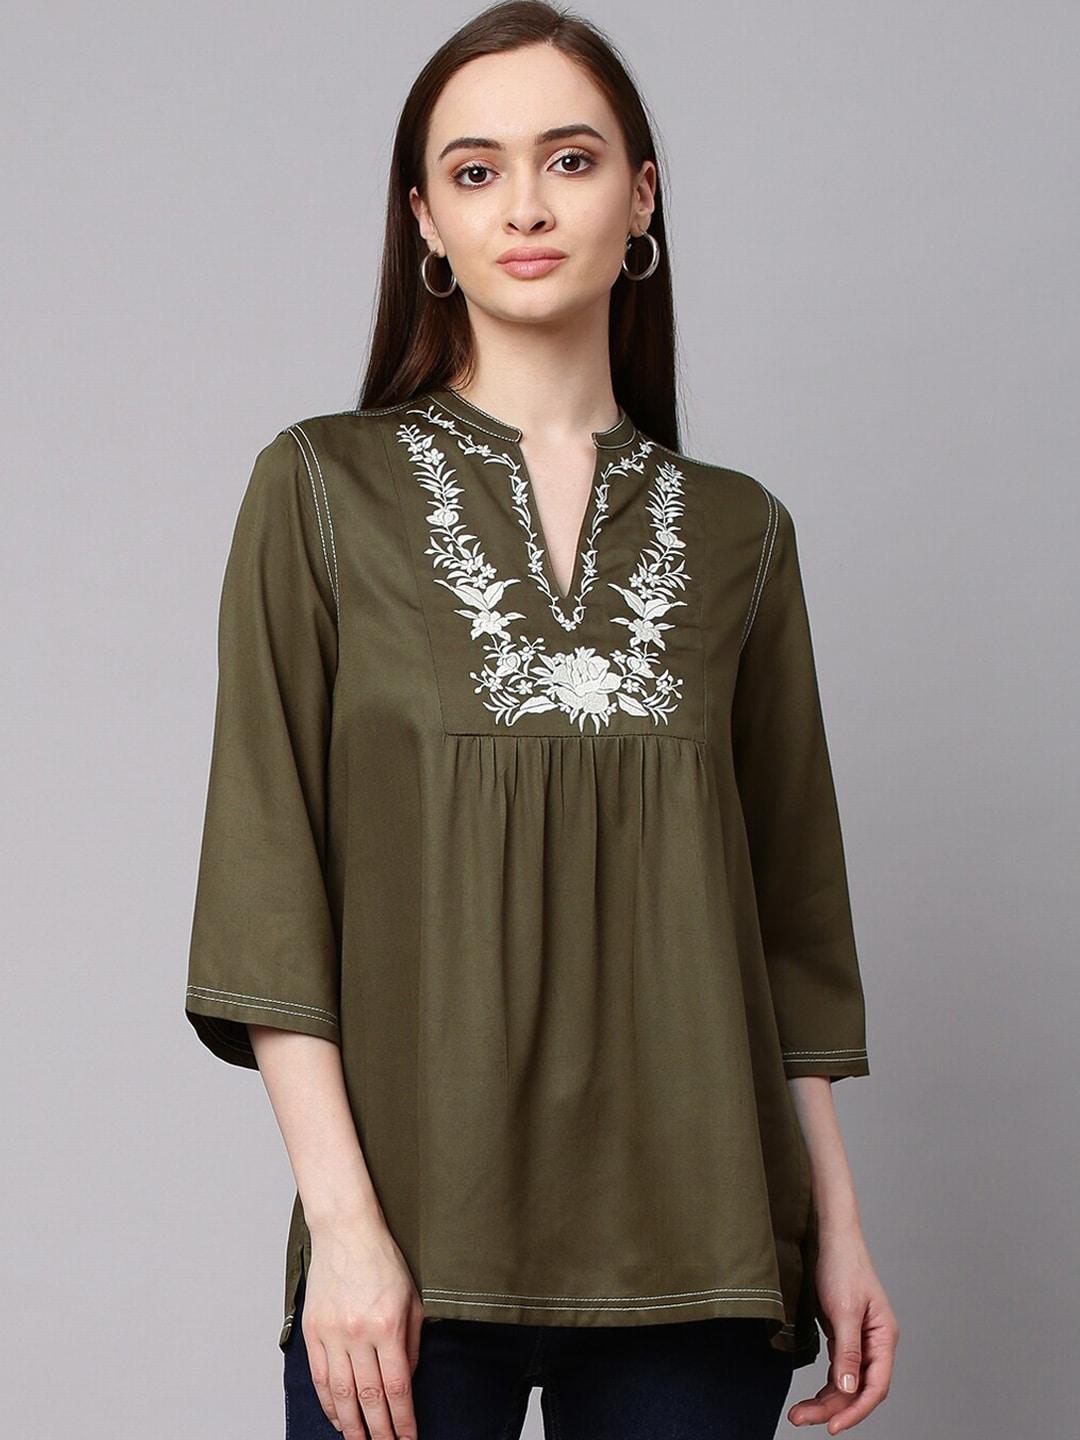 modern-indian-by-chemistry-women-olive-green-tunic-with-floral-embroidery